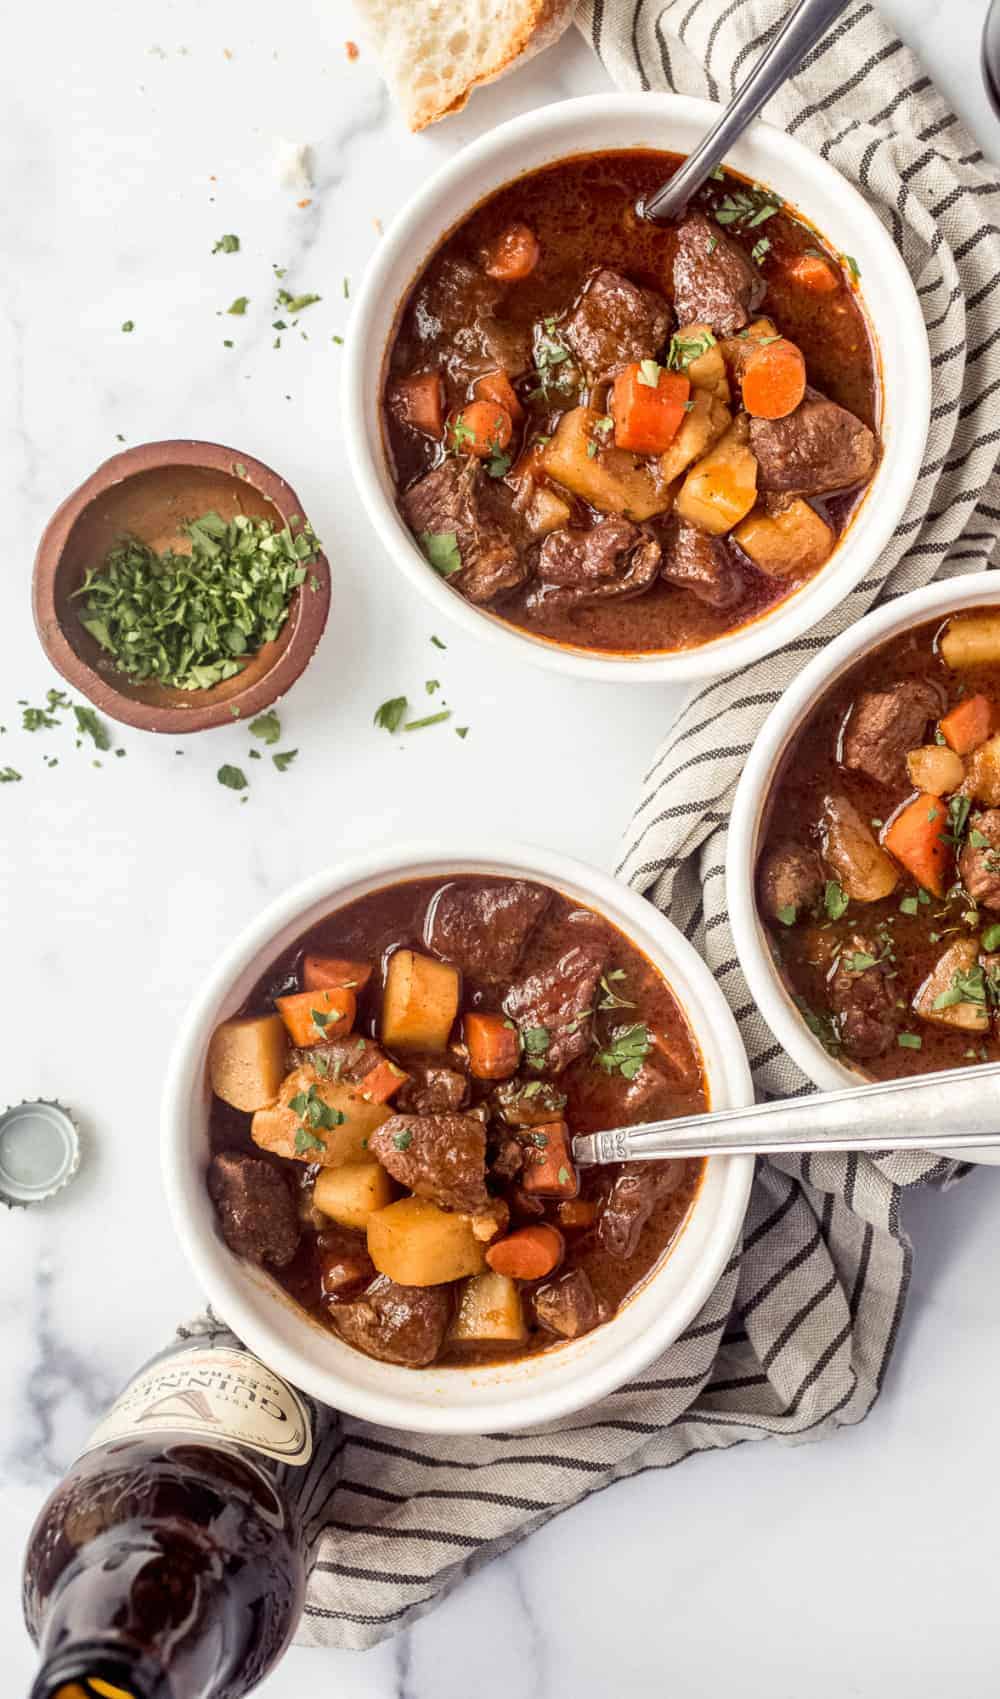 Bowls of Guinness beef stew on a white counter